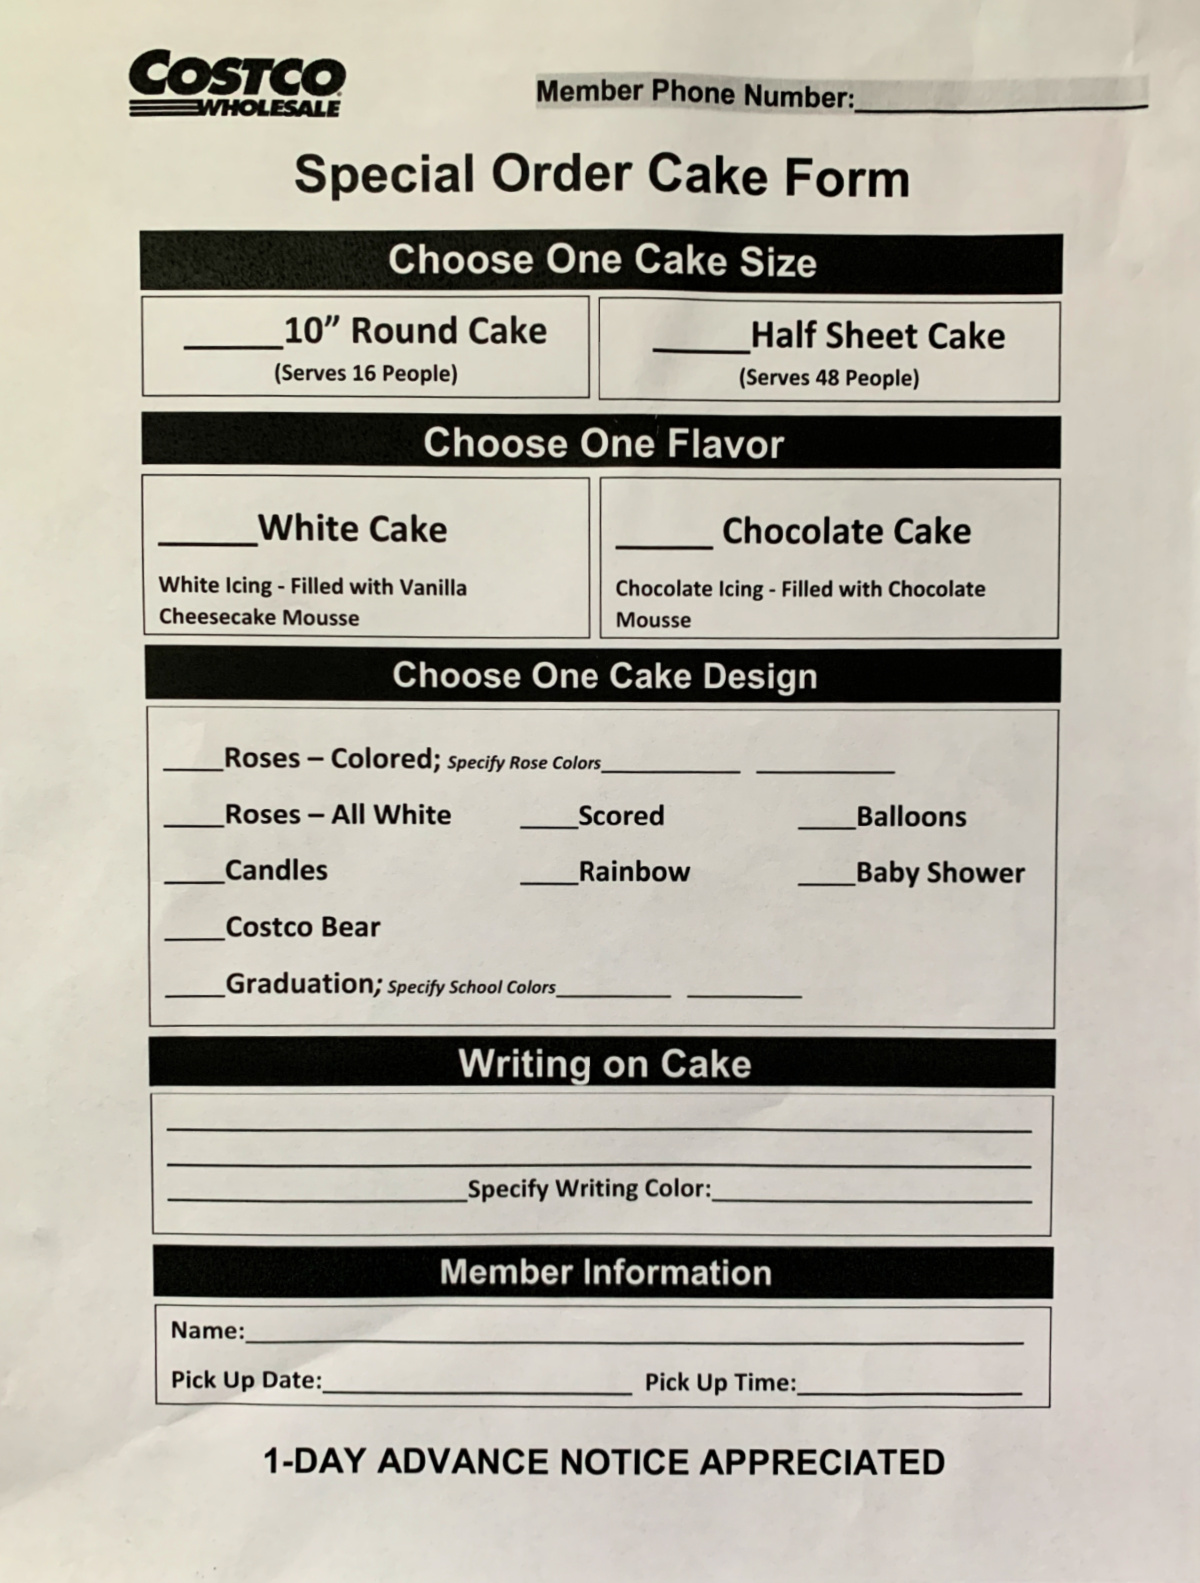 Costco cake ordering form - July 2021